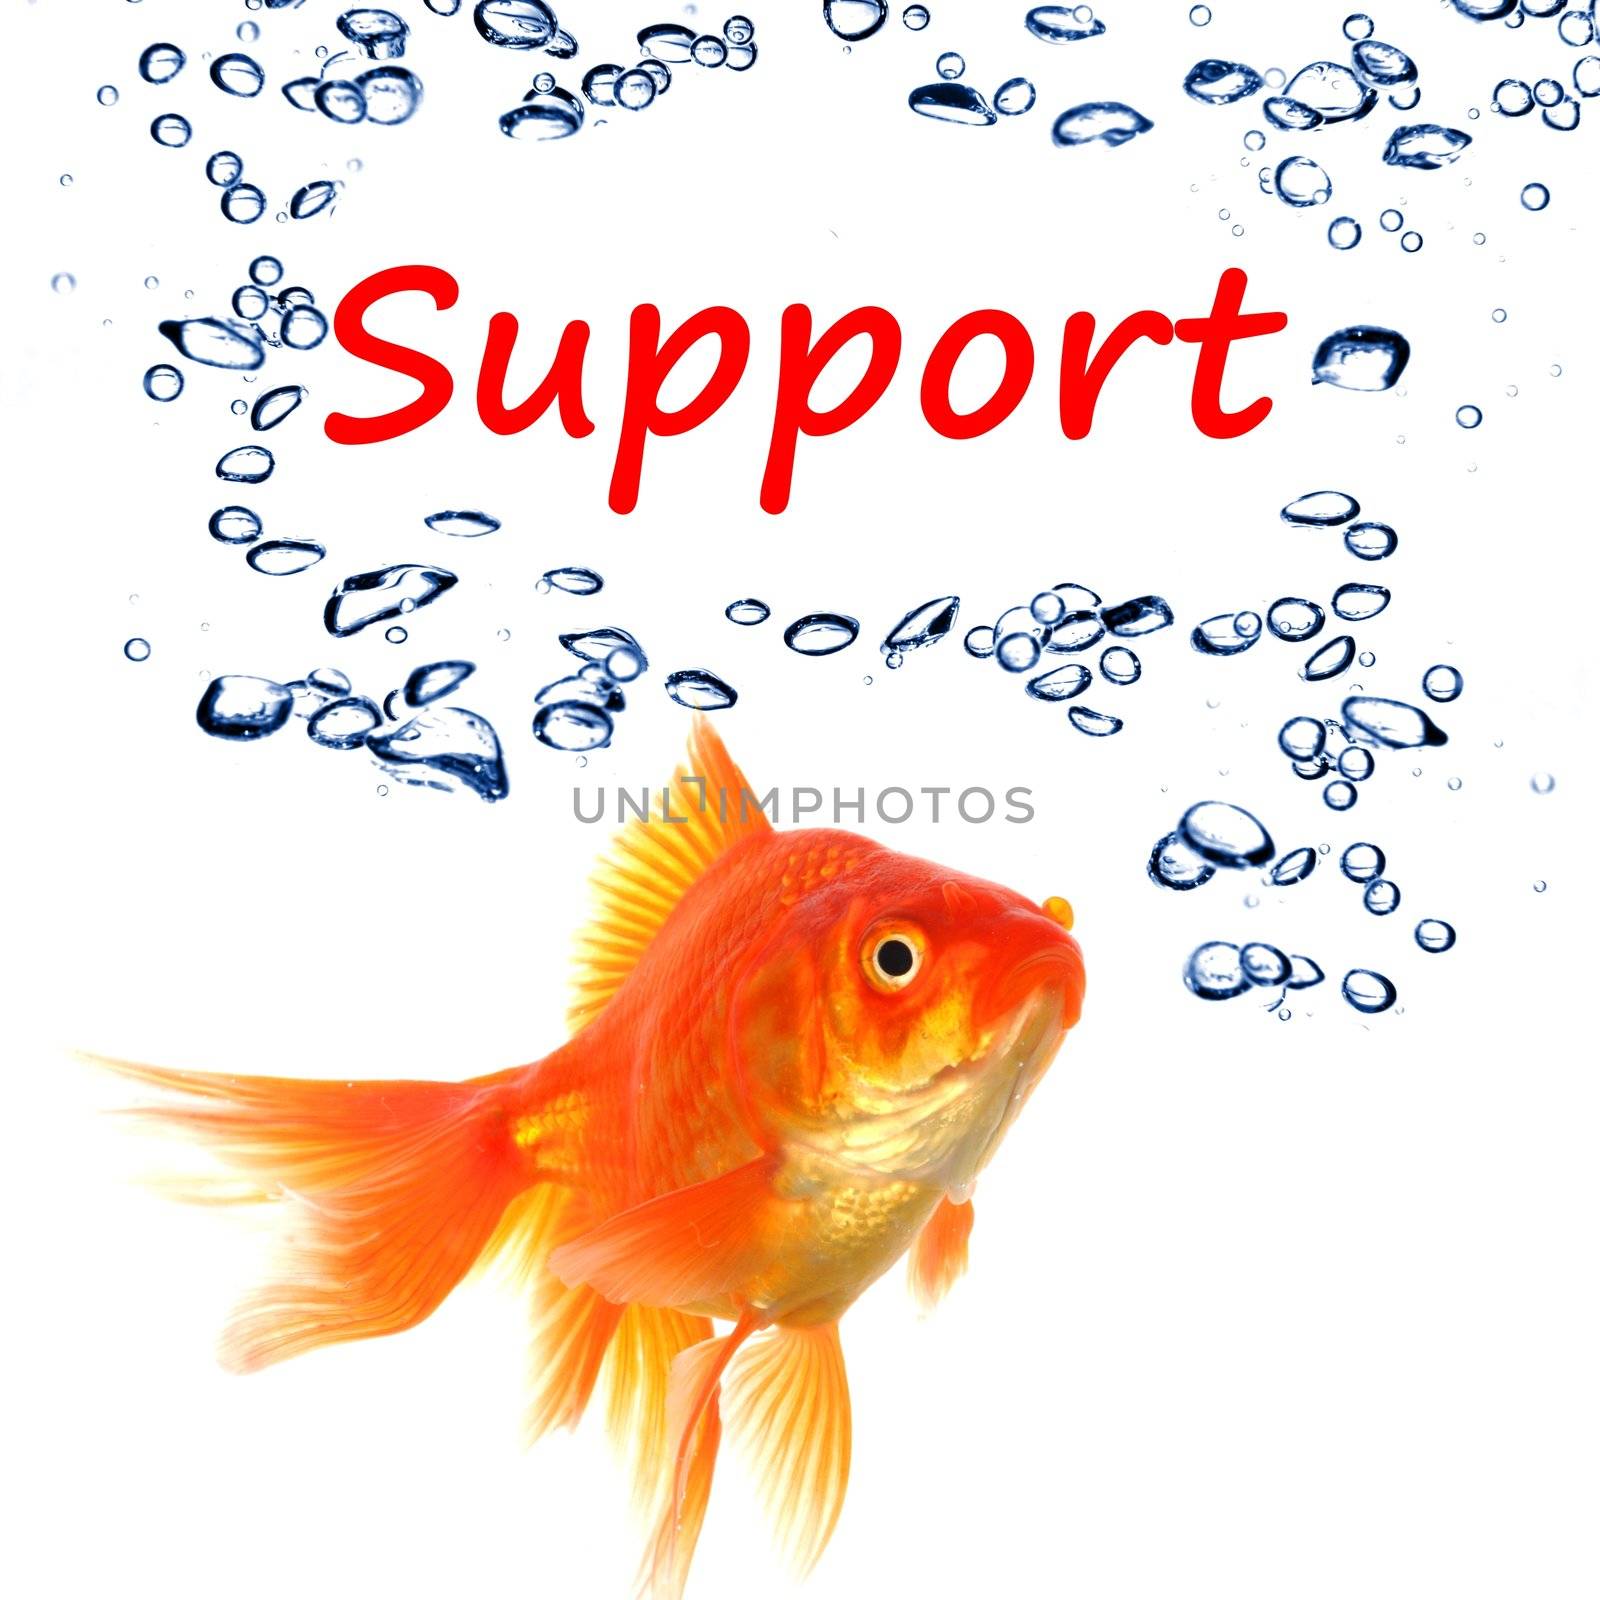 support or contact us concept with goldfish and water bubbles on white